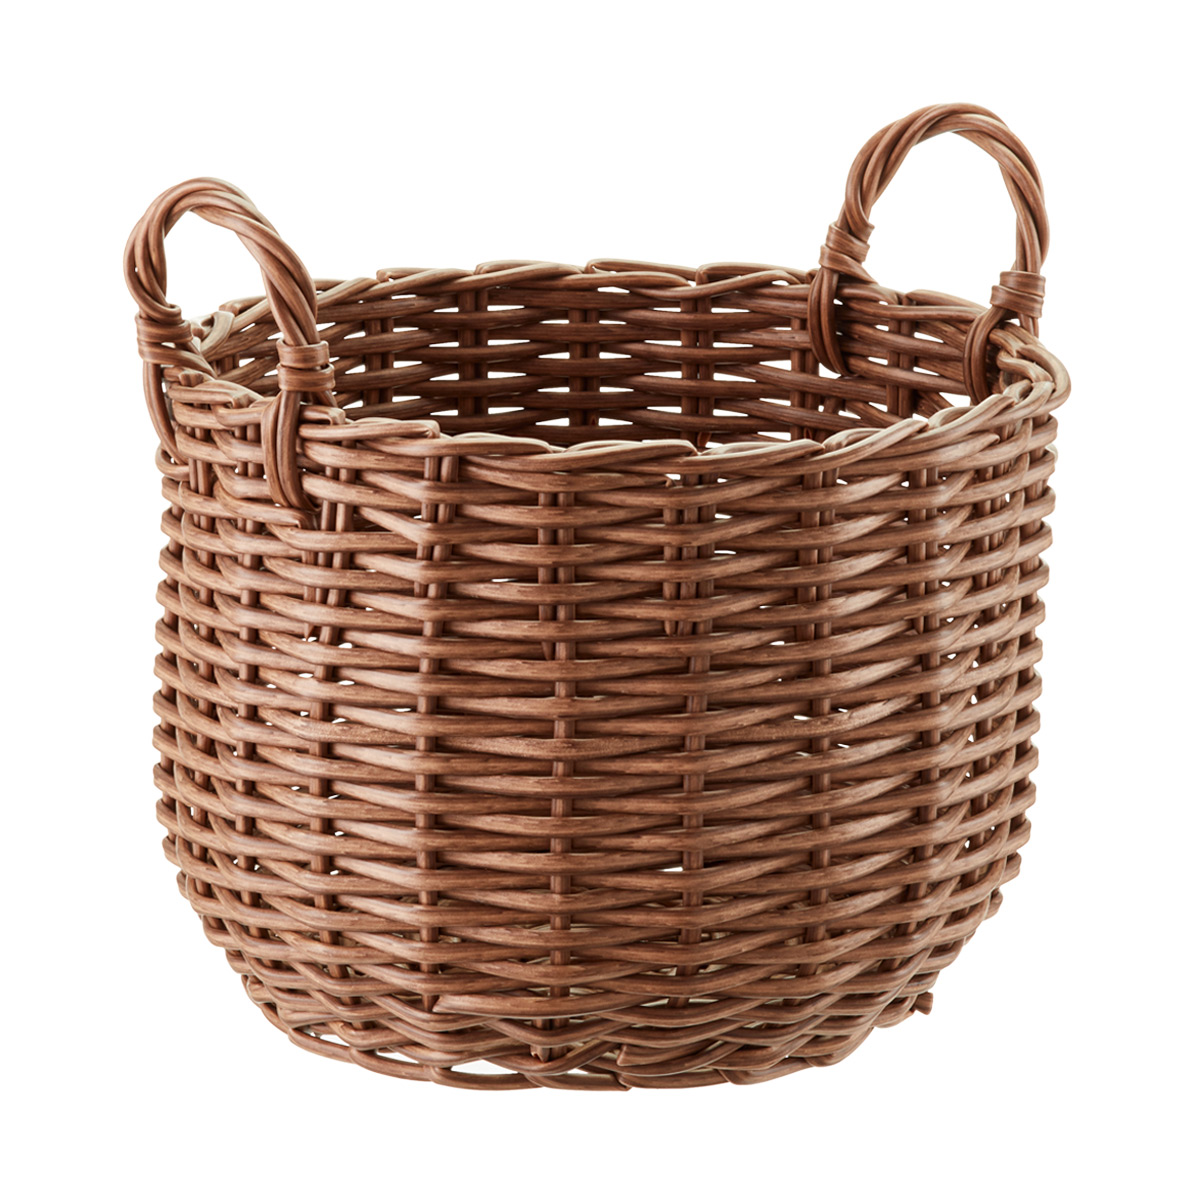 Wicker baskets round plastic storage container with handles UULAVNS